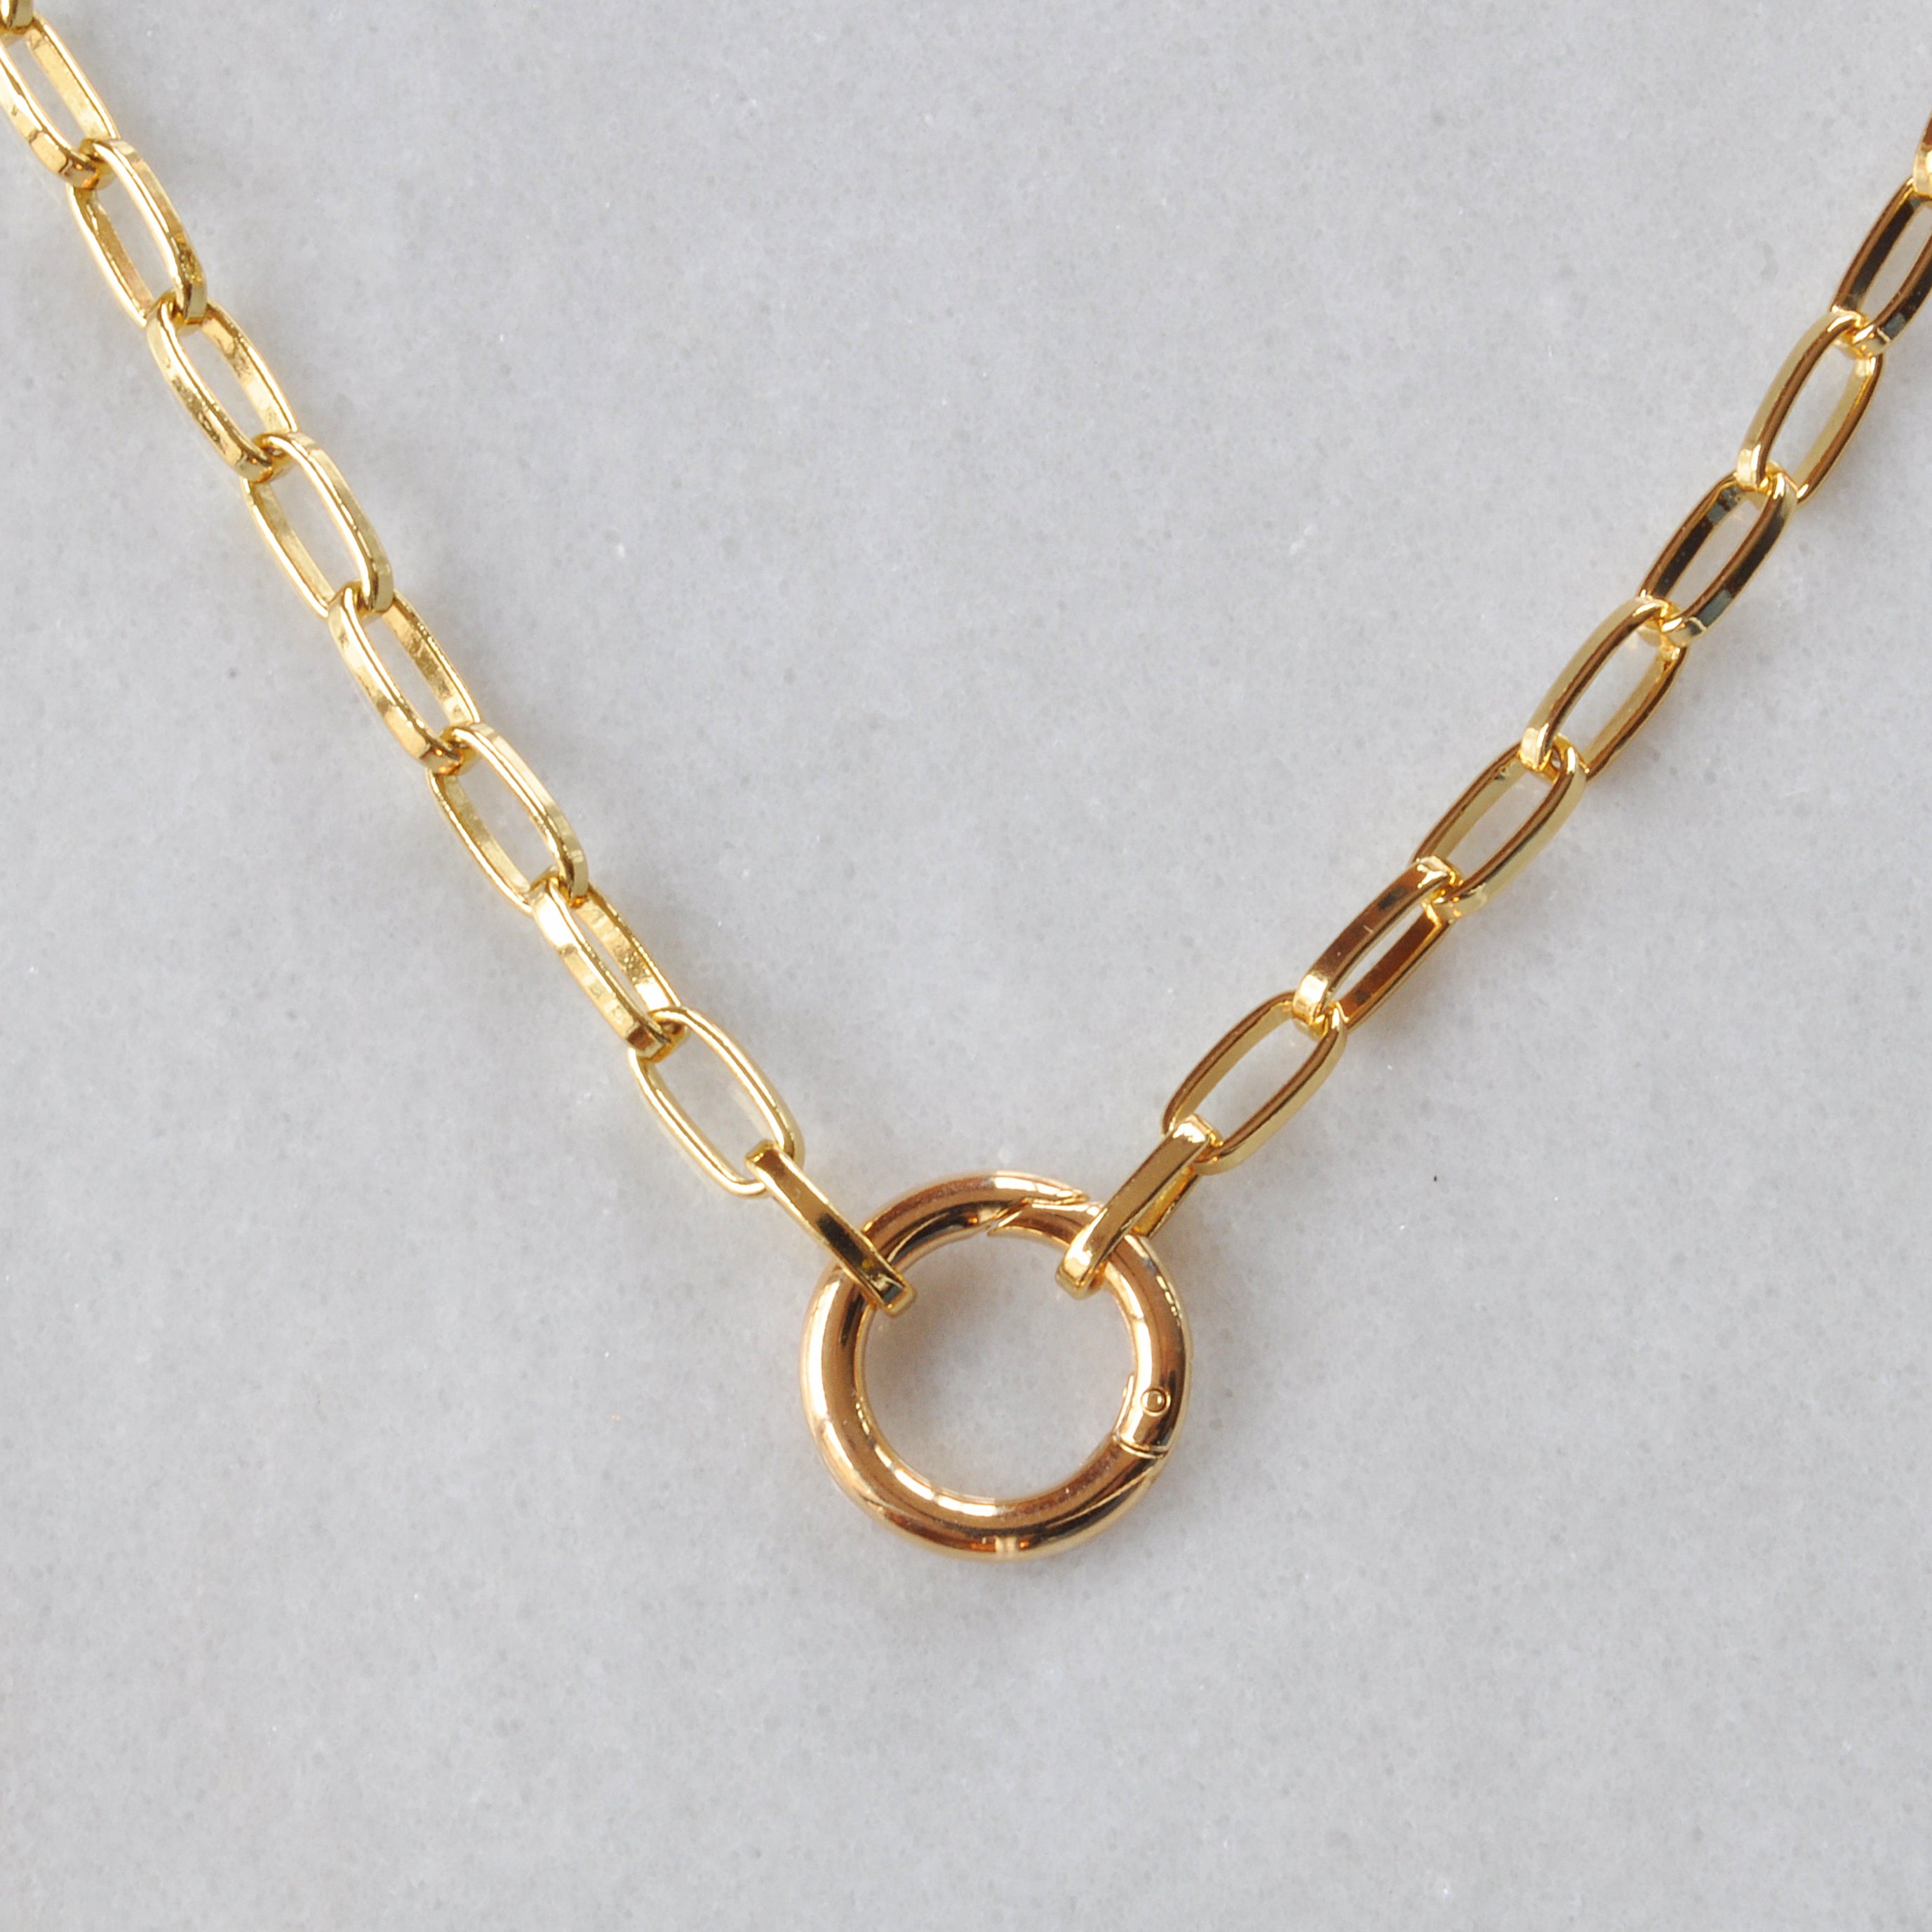 Double Carabiner Clasp Necklace, Gold Necklace, Gold Link Necklace, Gold  Carabiner Lock Necklace, Paperclip Link Chain Necklace,24kt 